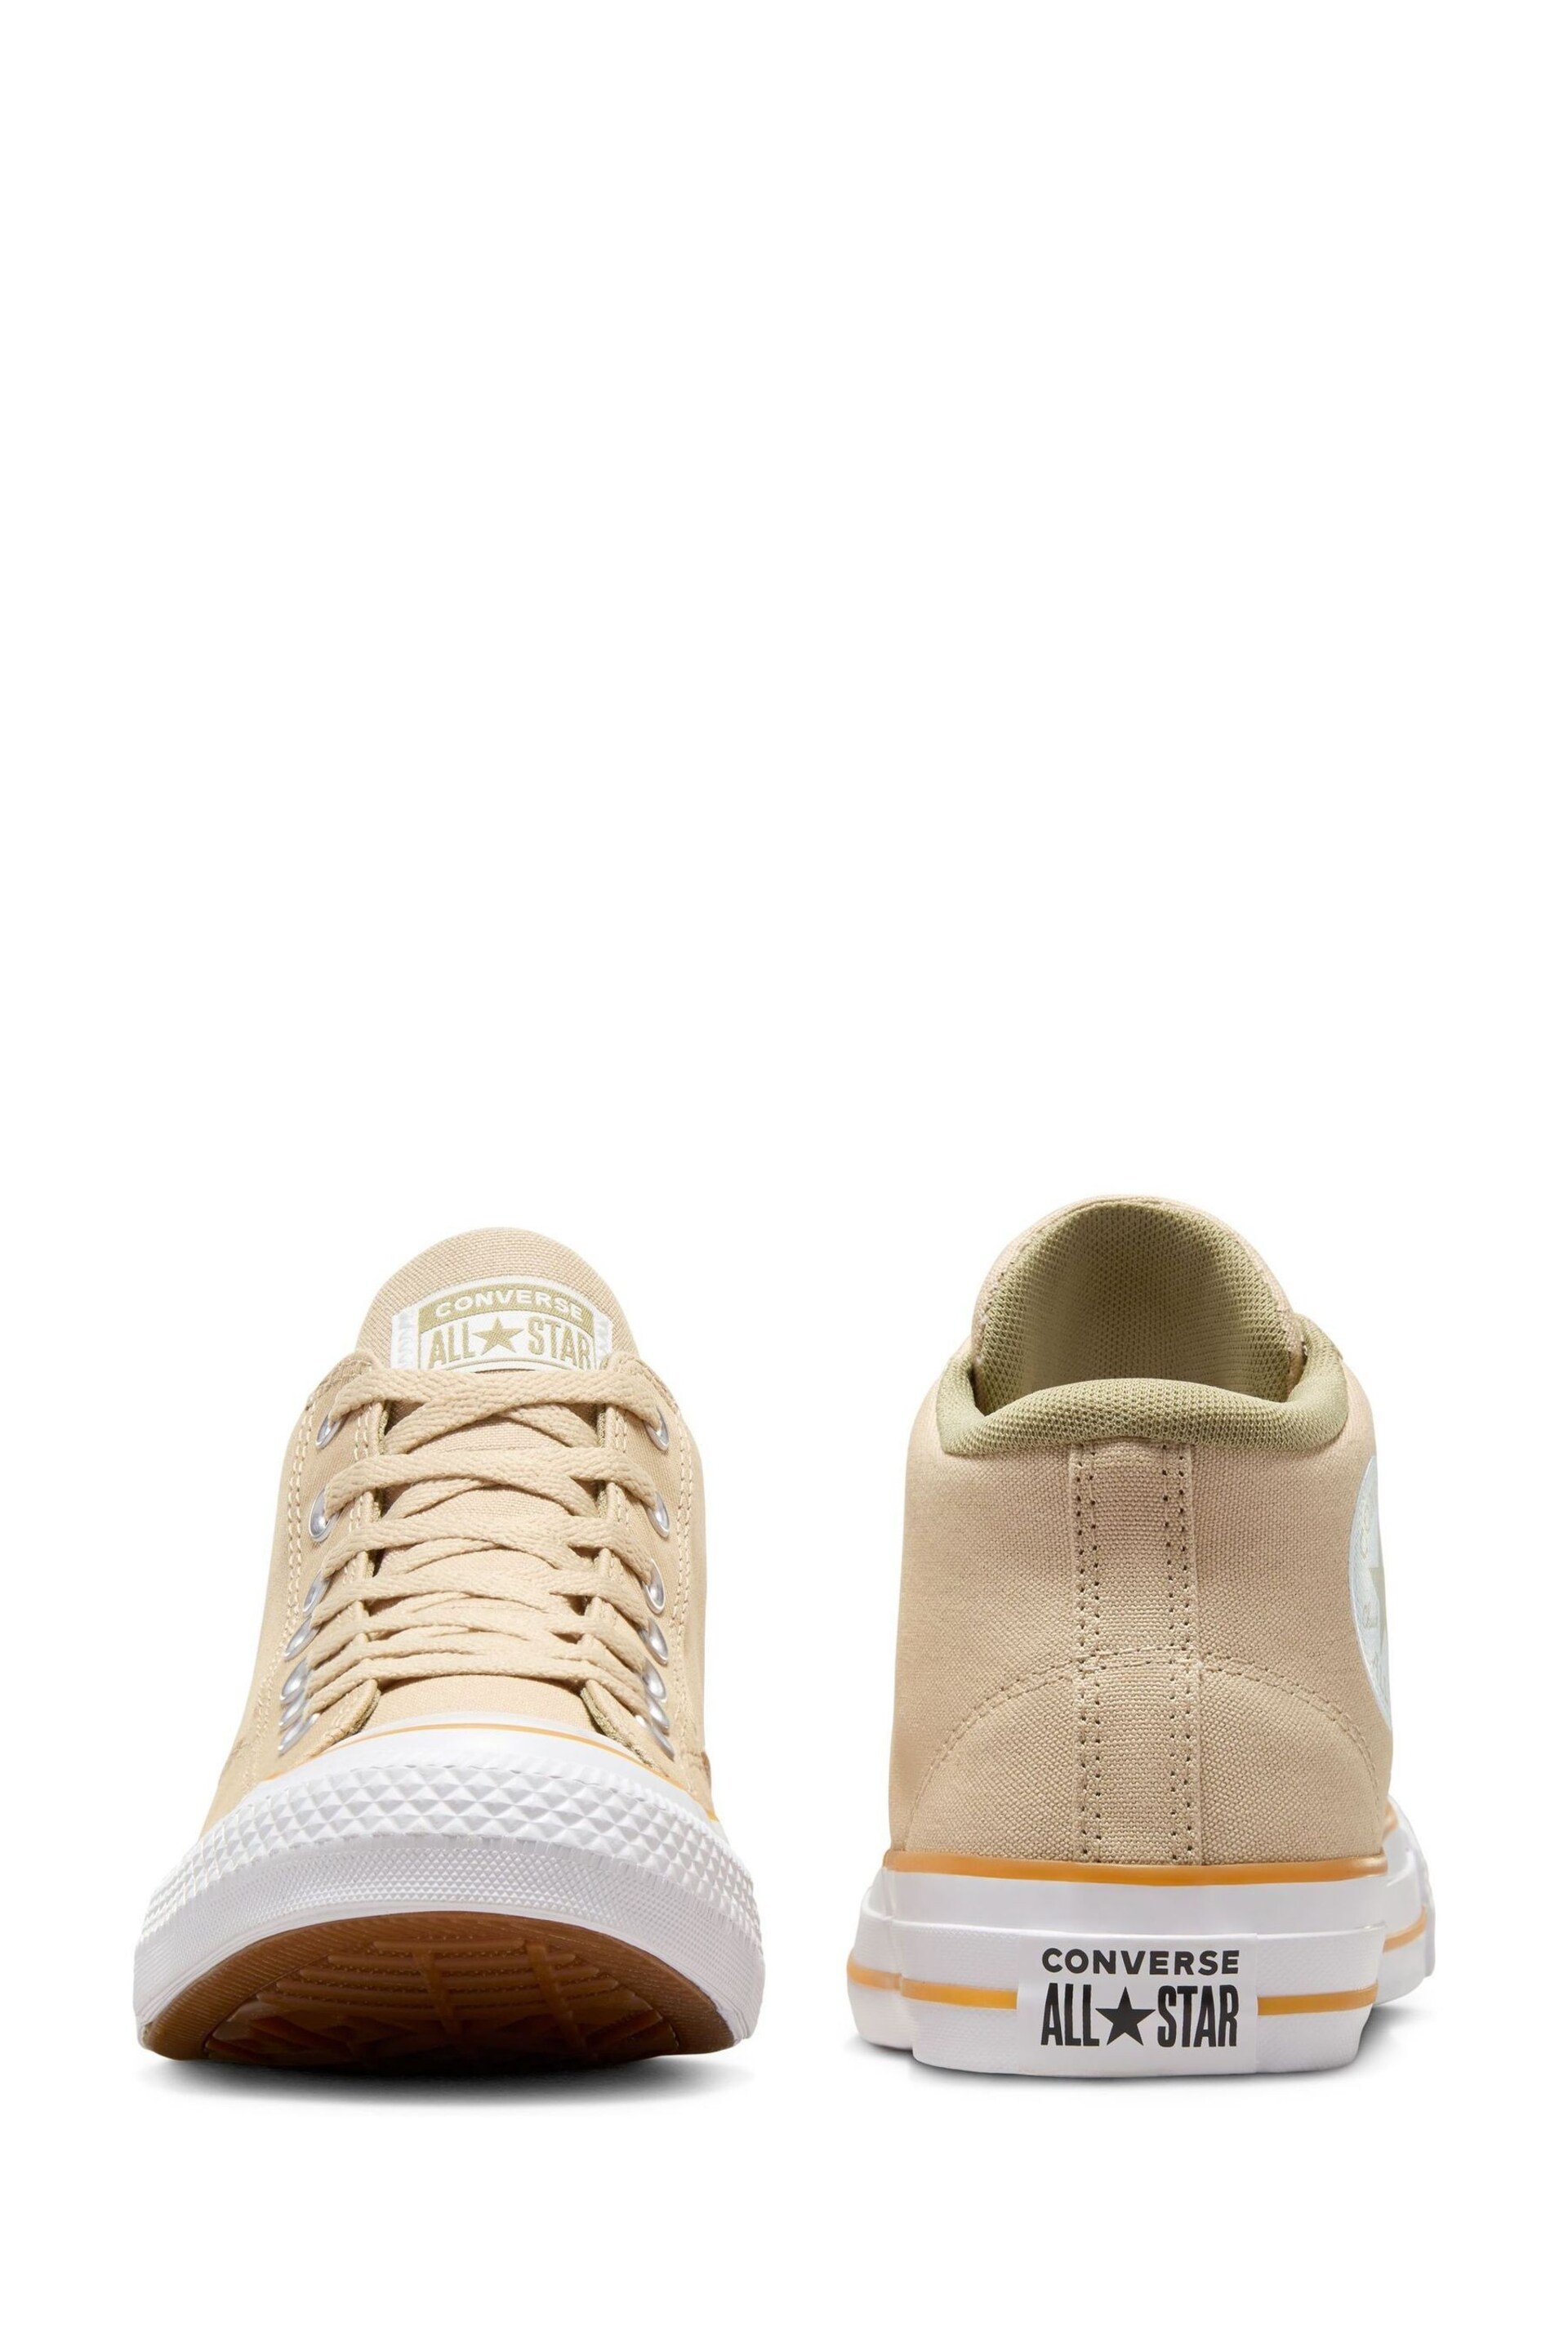 Converse Natural Chuck Taylor All Star Malden Street Trainers - Image 2 of 9